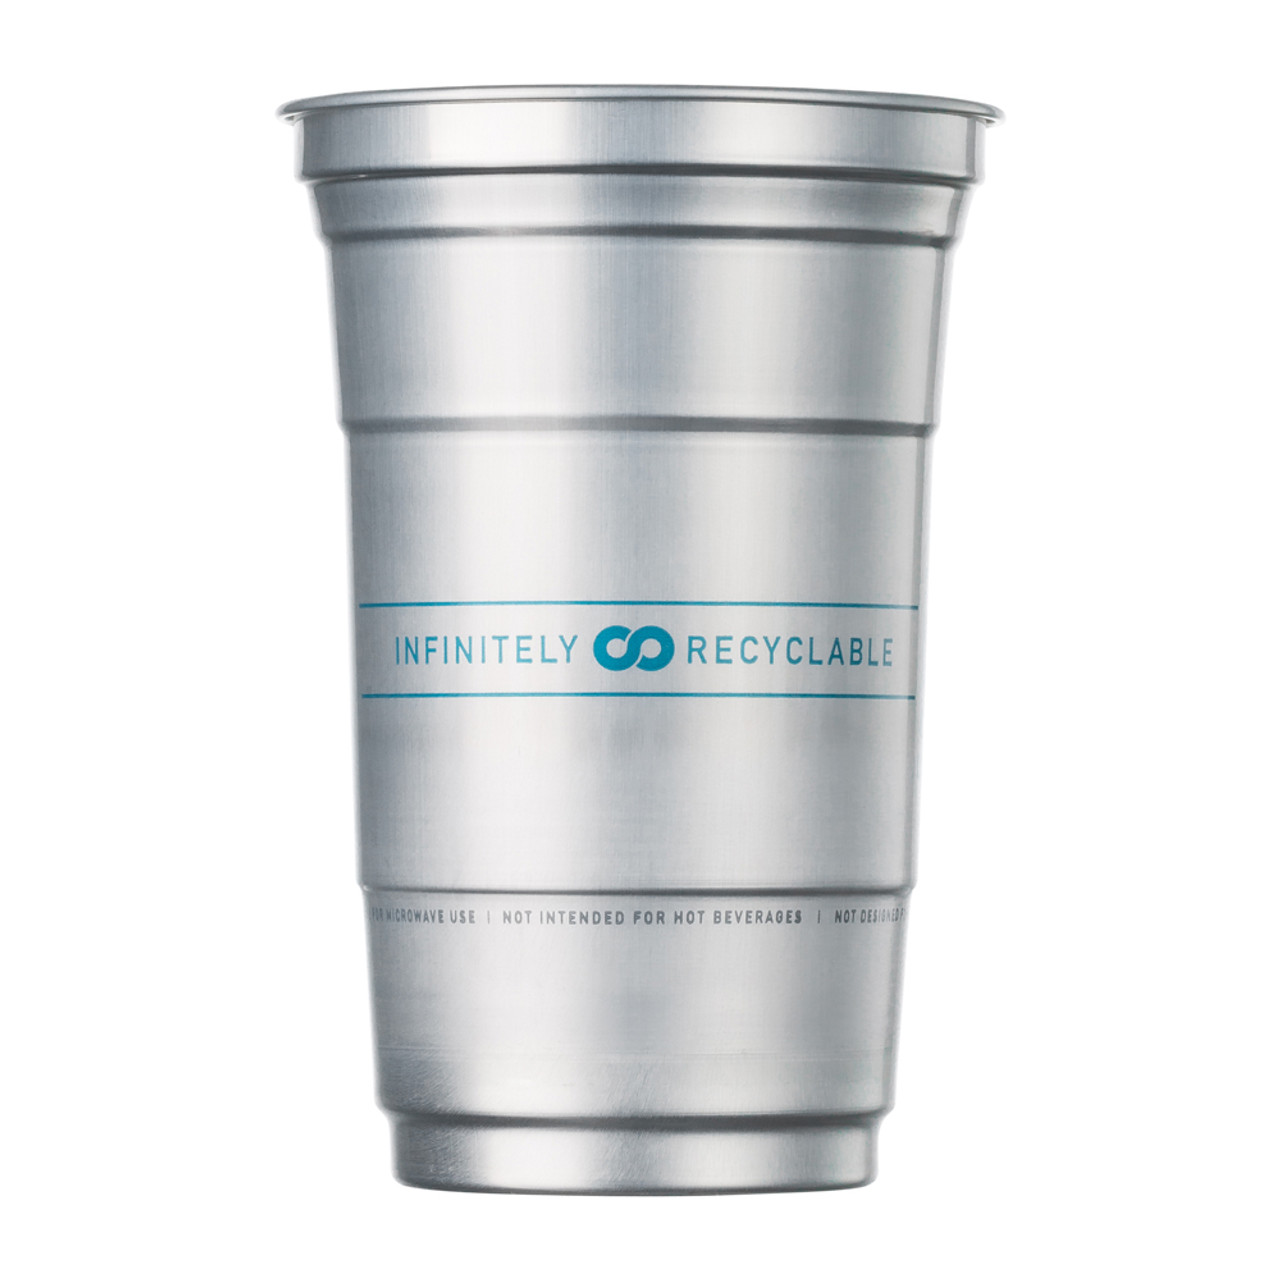 Ball Aluminum Cup Recyclable Party Cups, 20 oz. Cup, 10 Cups Per Pack